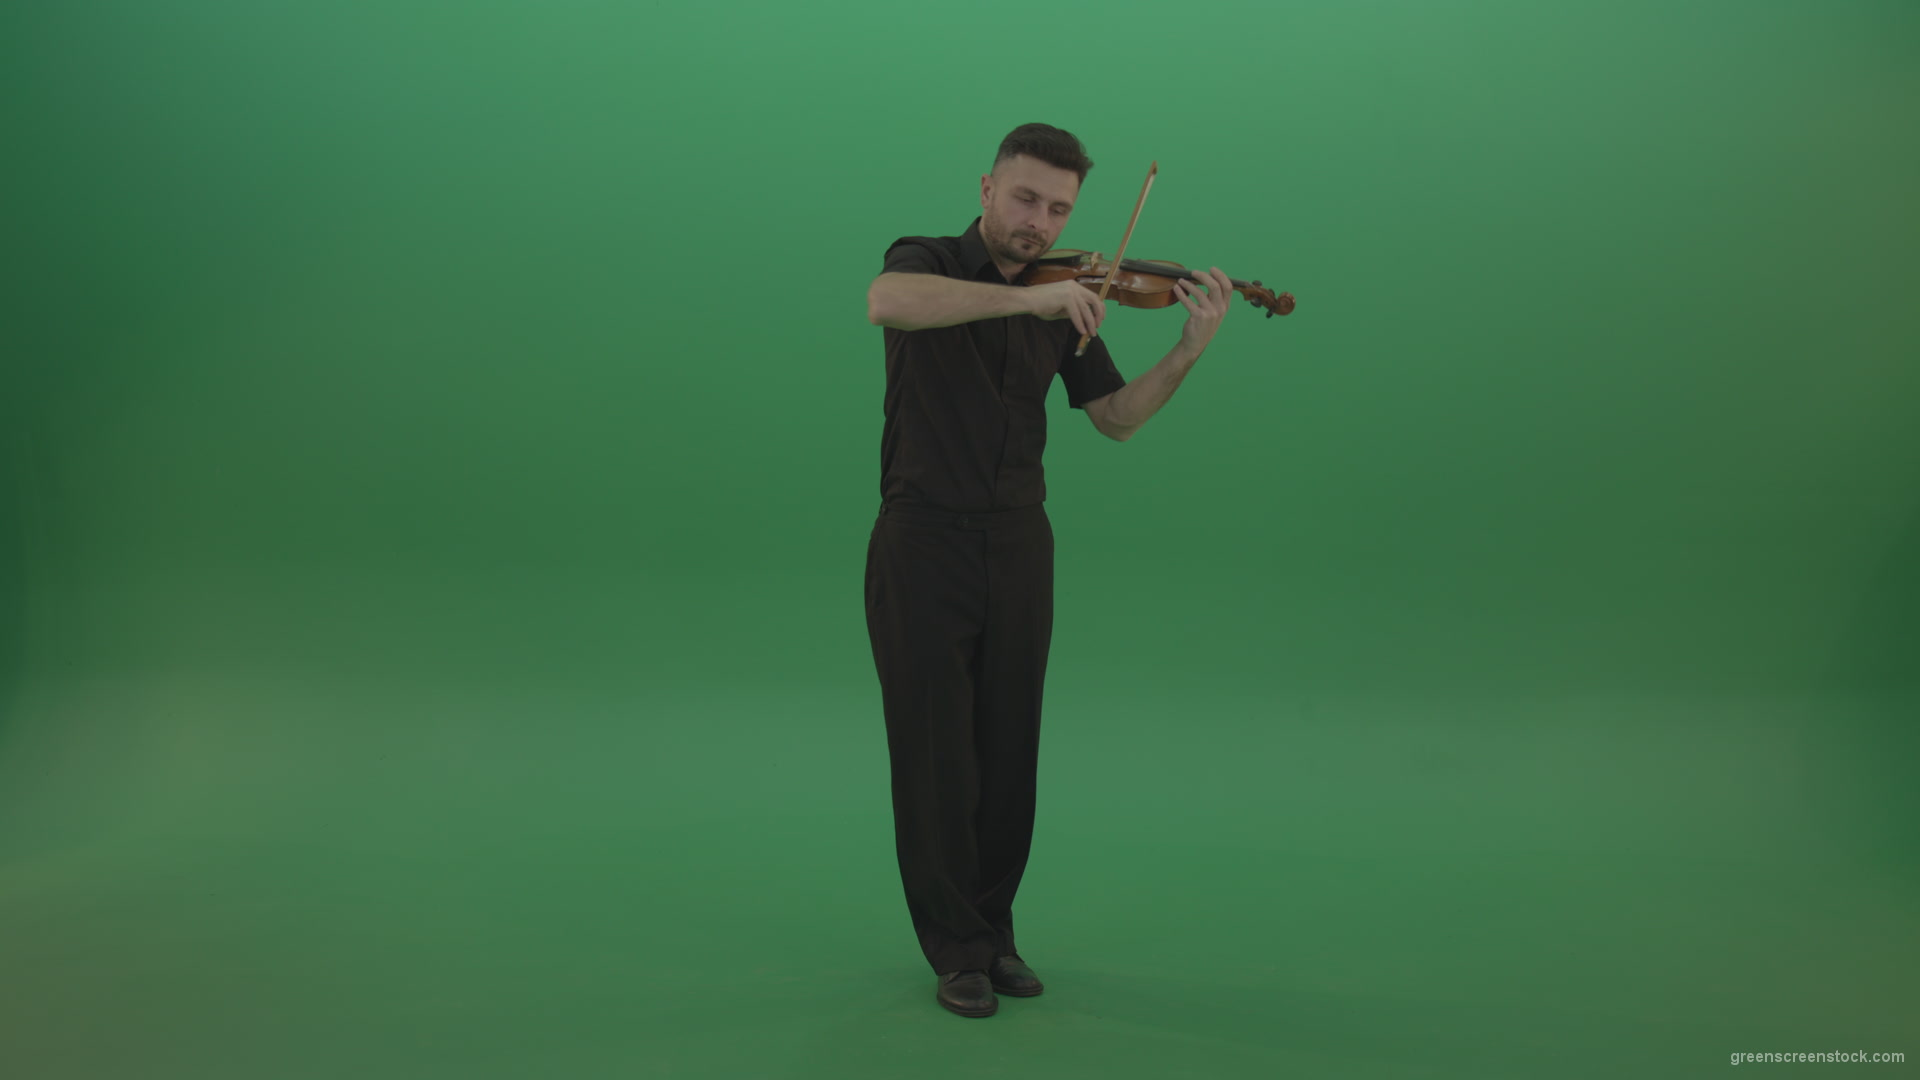 Full-size-view-virtuoso-Man-in-black-costume-play-violin-fiddle-strings-music-instument-on-green-screen_004 Green Screen Stock